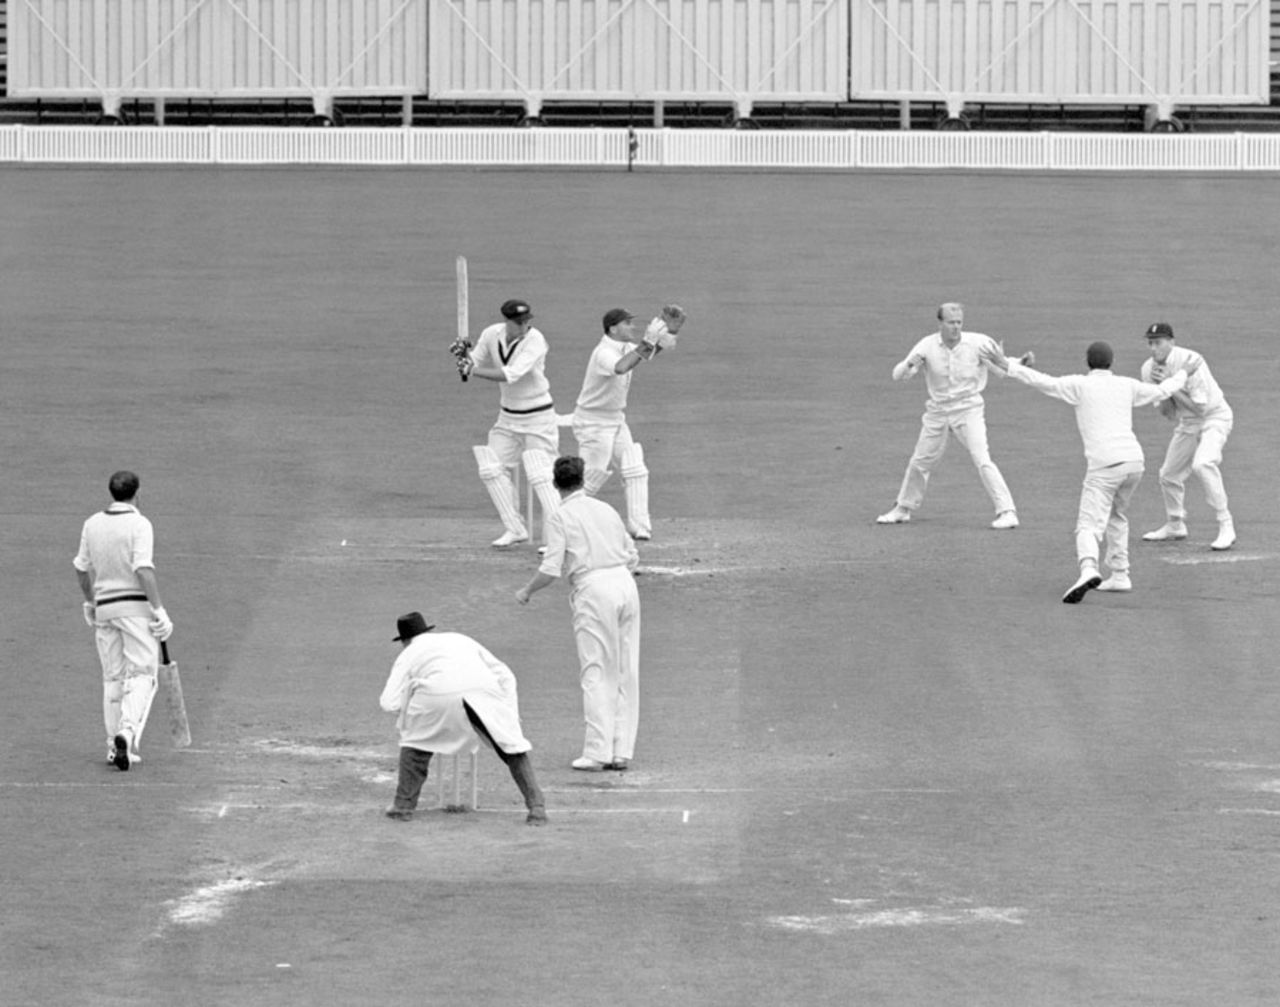 Ron Archer is caught by Alan Oakman off Jim Laker for a duck, England v Australia, 4th Test, Old Trafford, 5th day, July 31, 1956